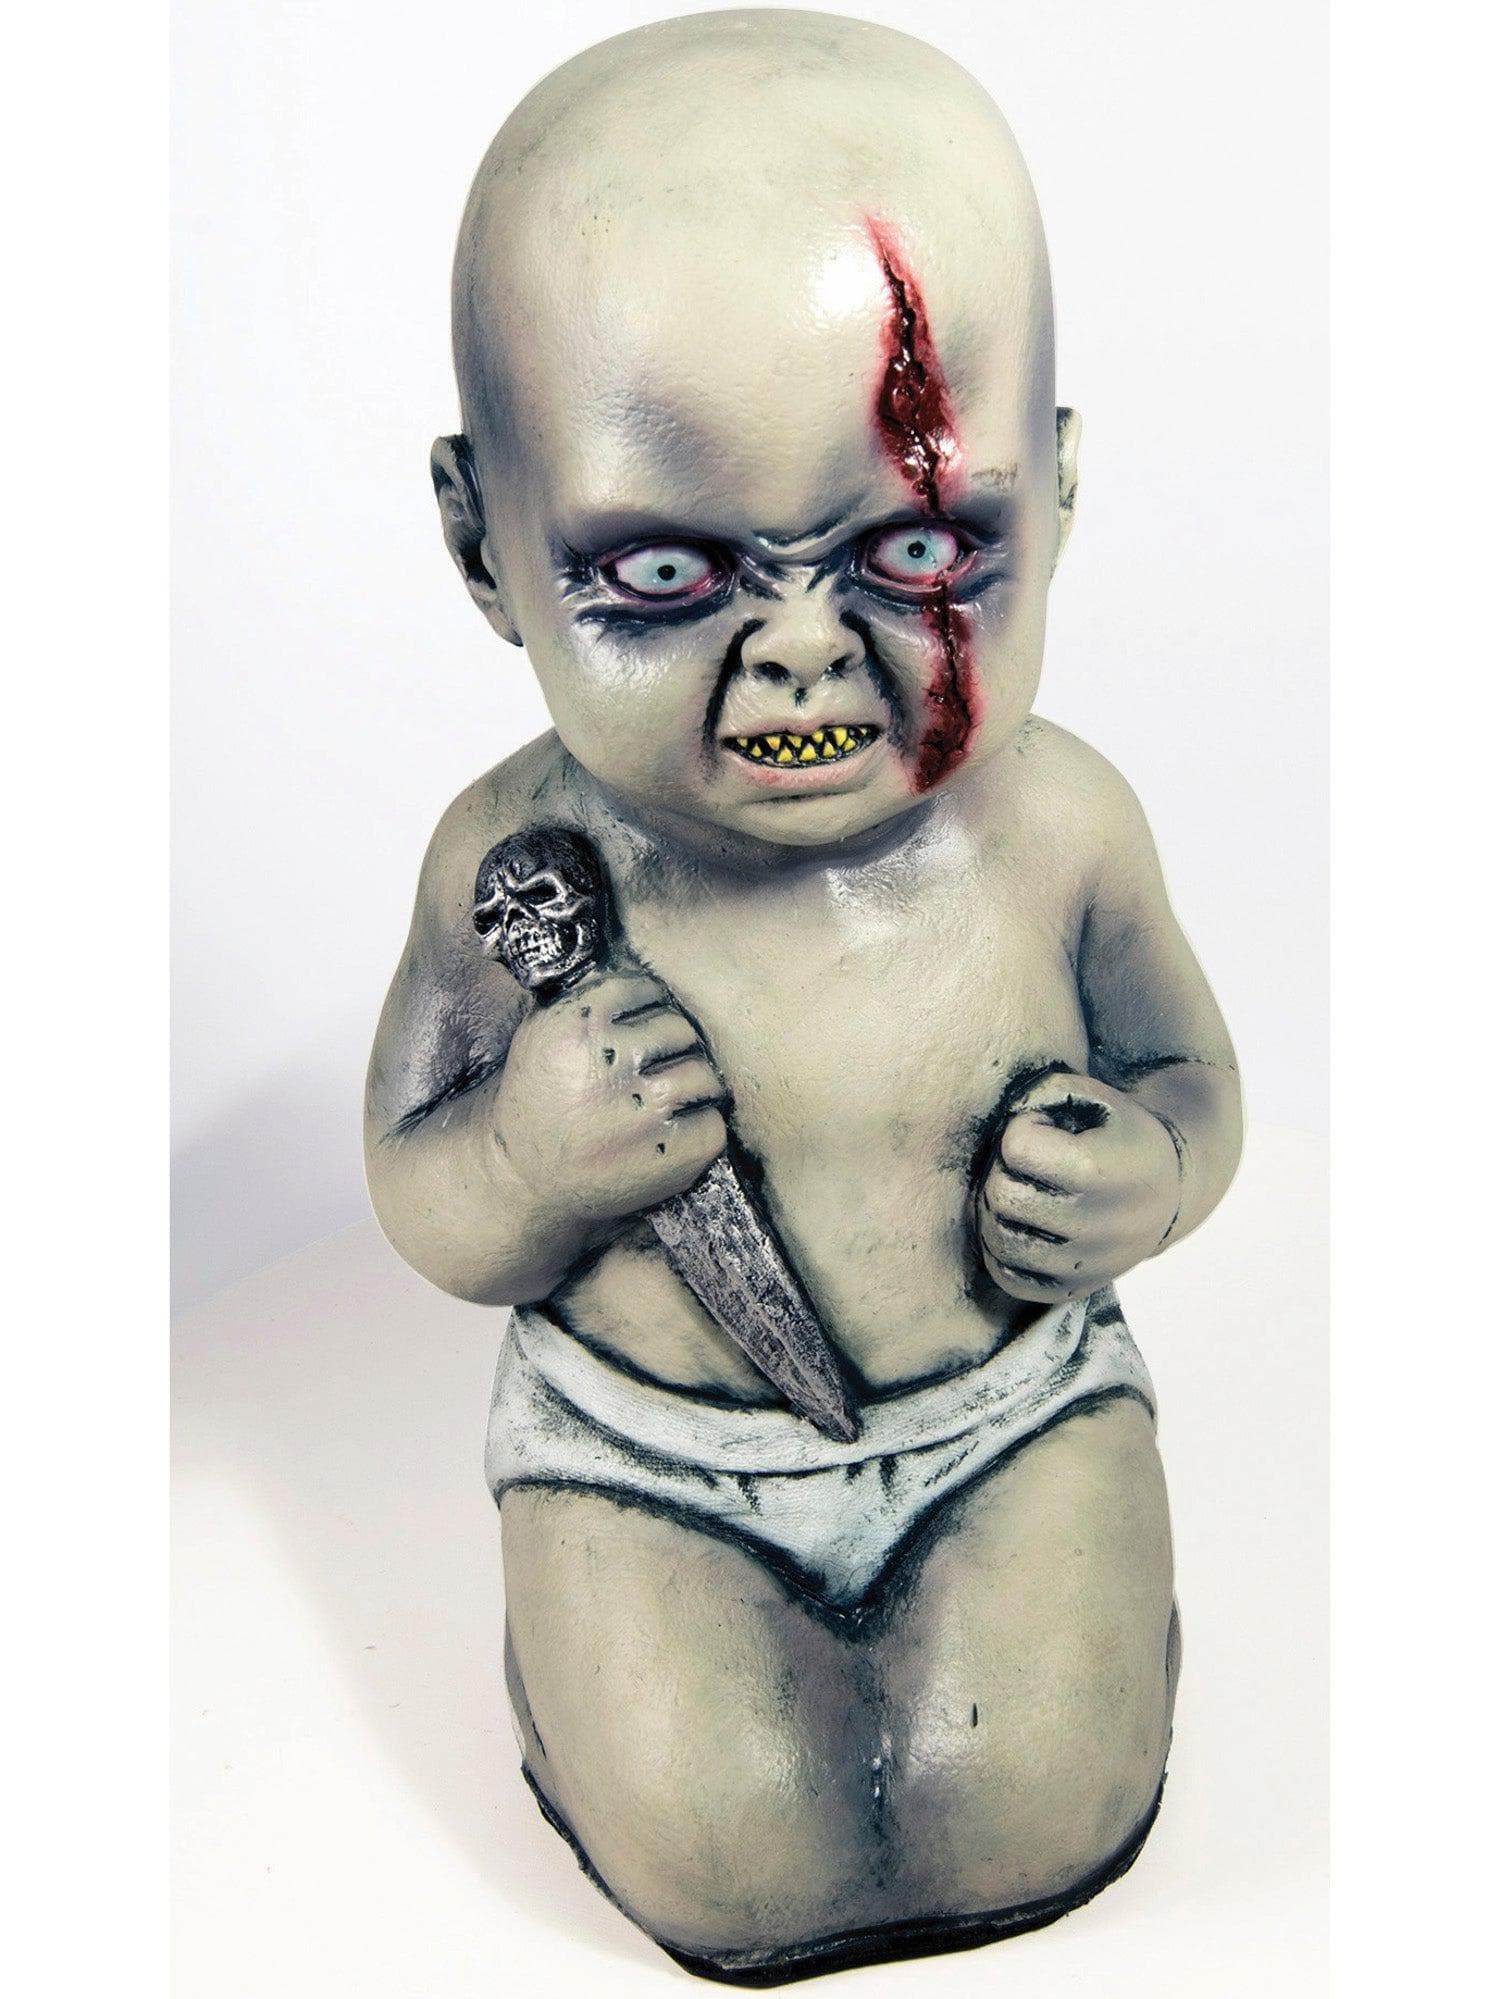 14-inch Evil Zombie Baby Holding Knife Prop - costumes.com